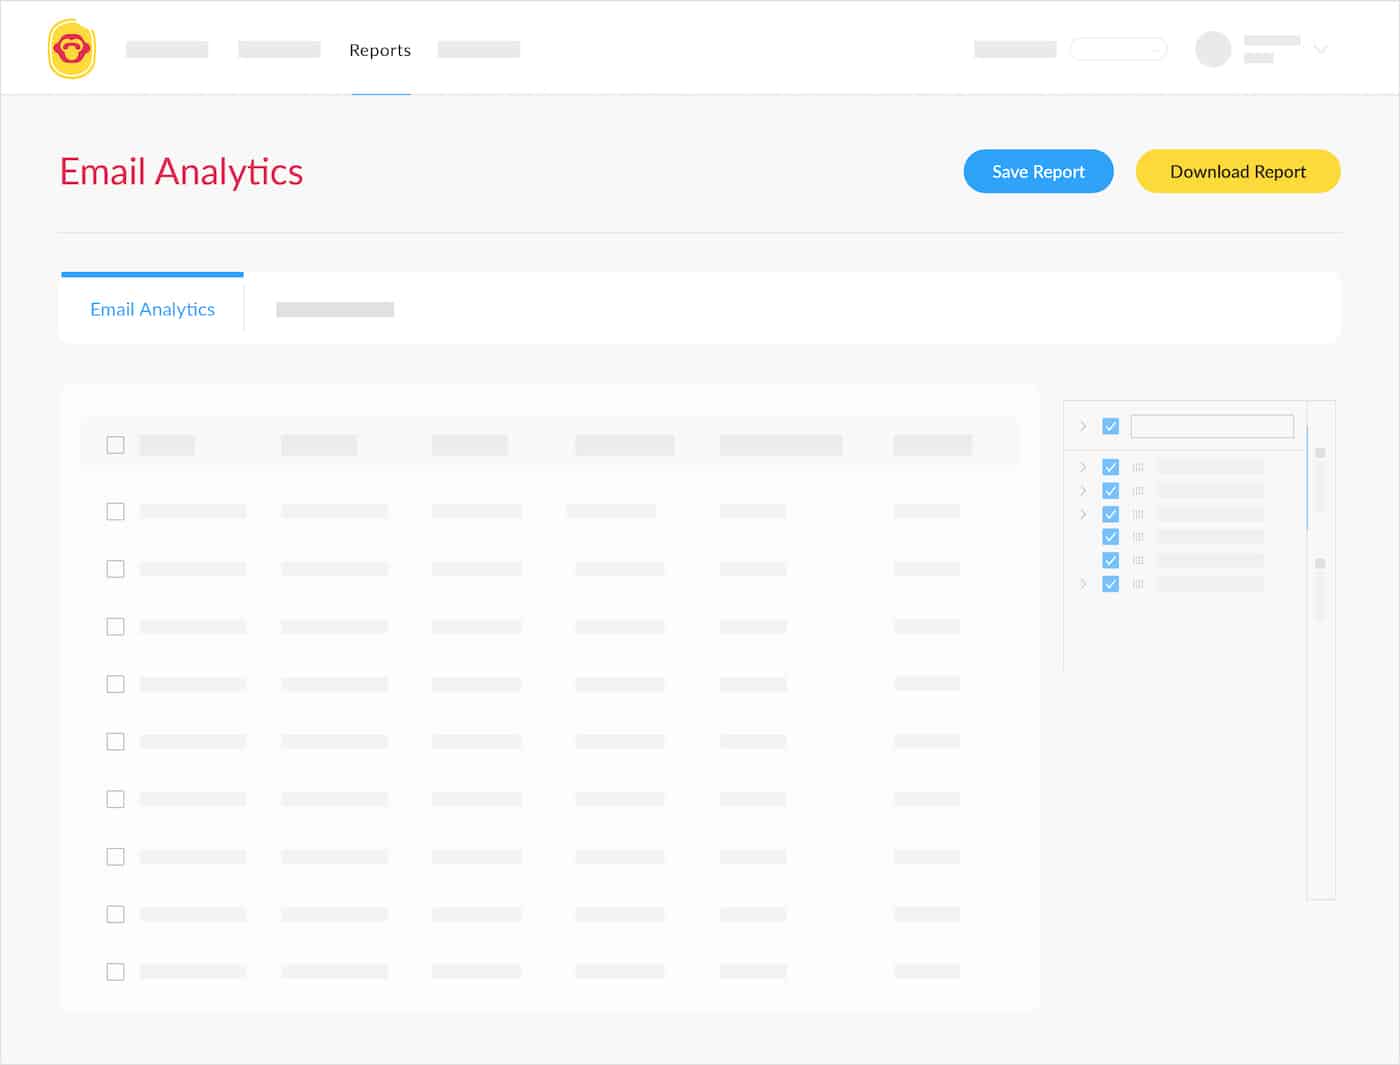 Email Analytics reporting for ContactMonkey